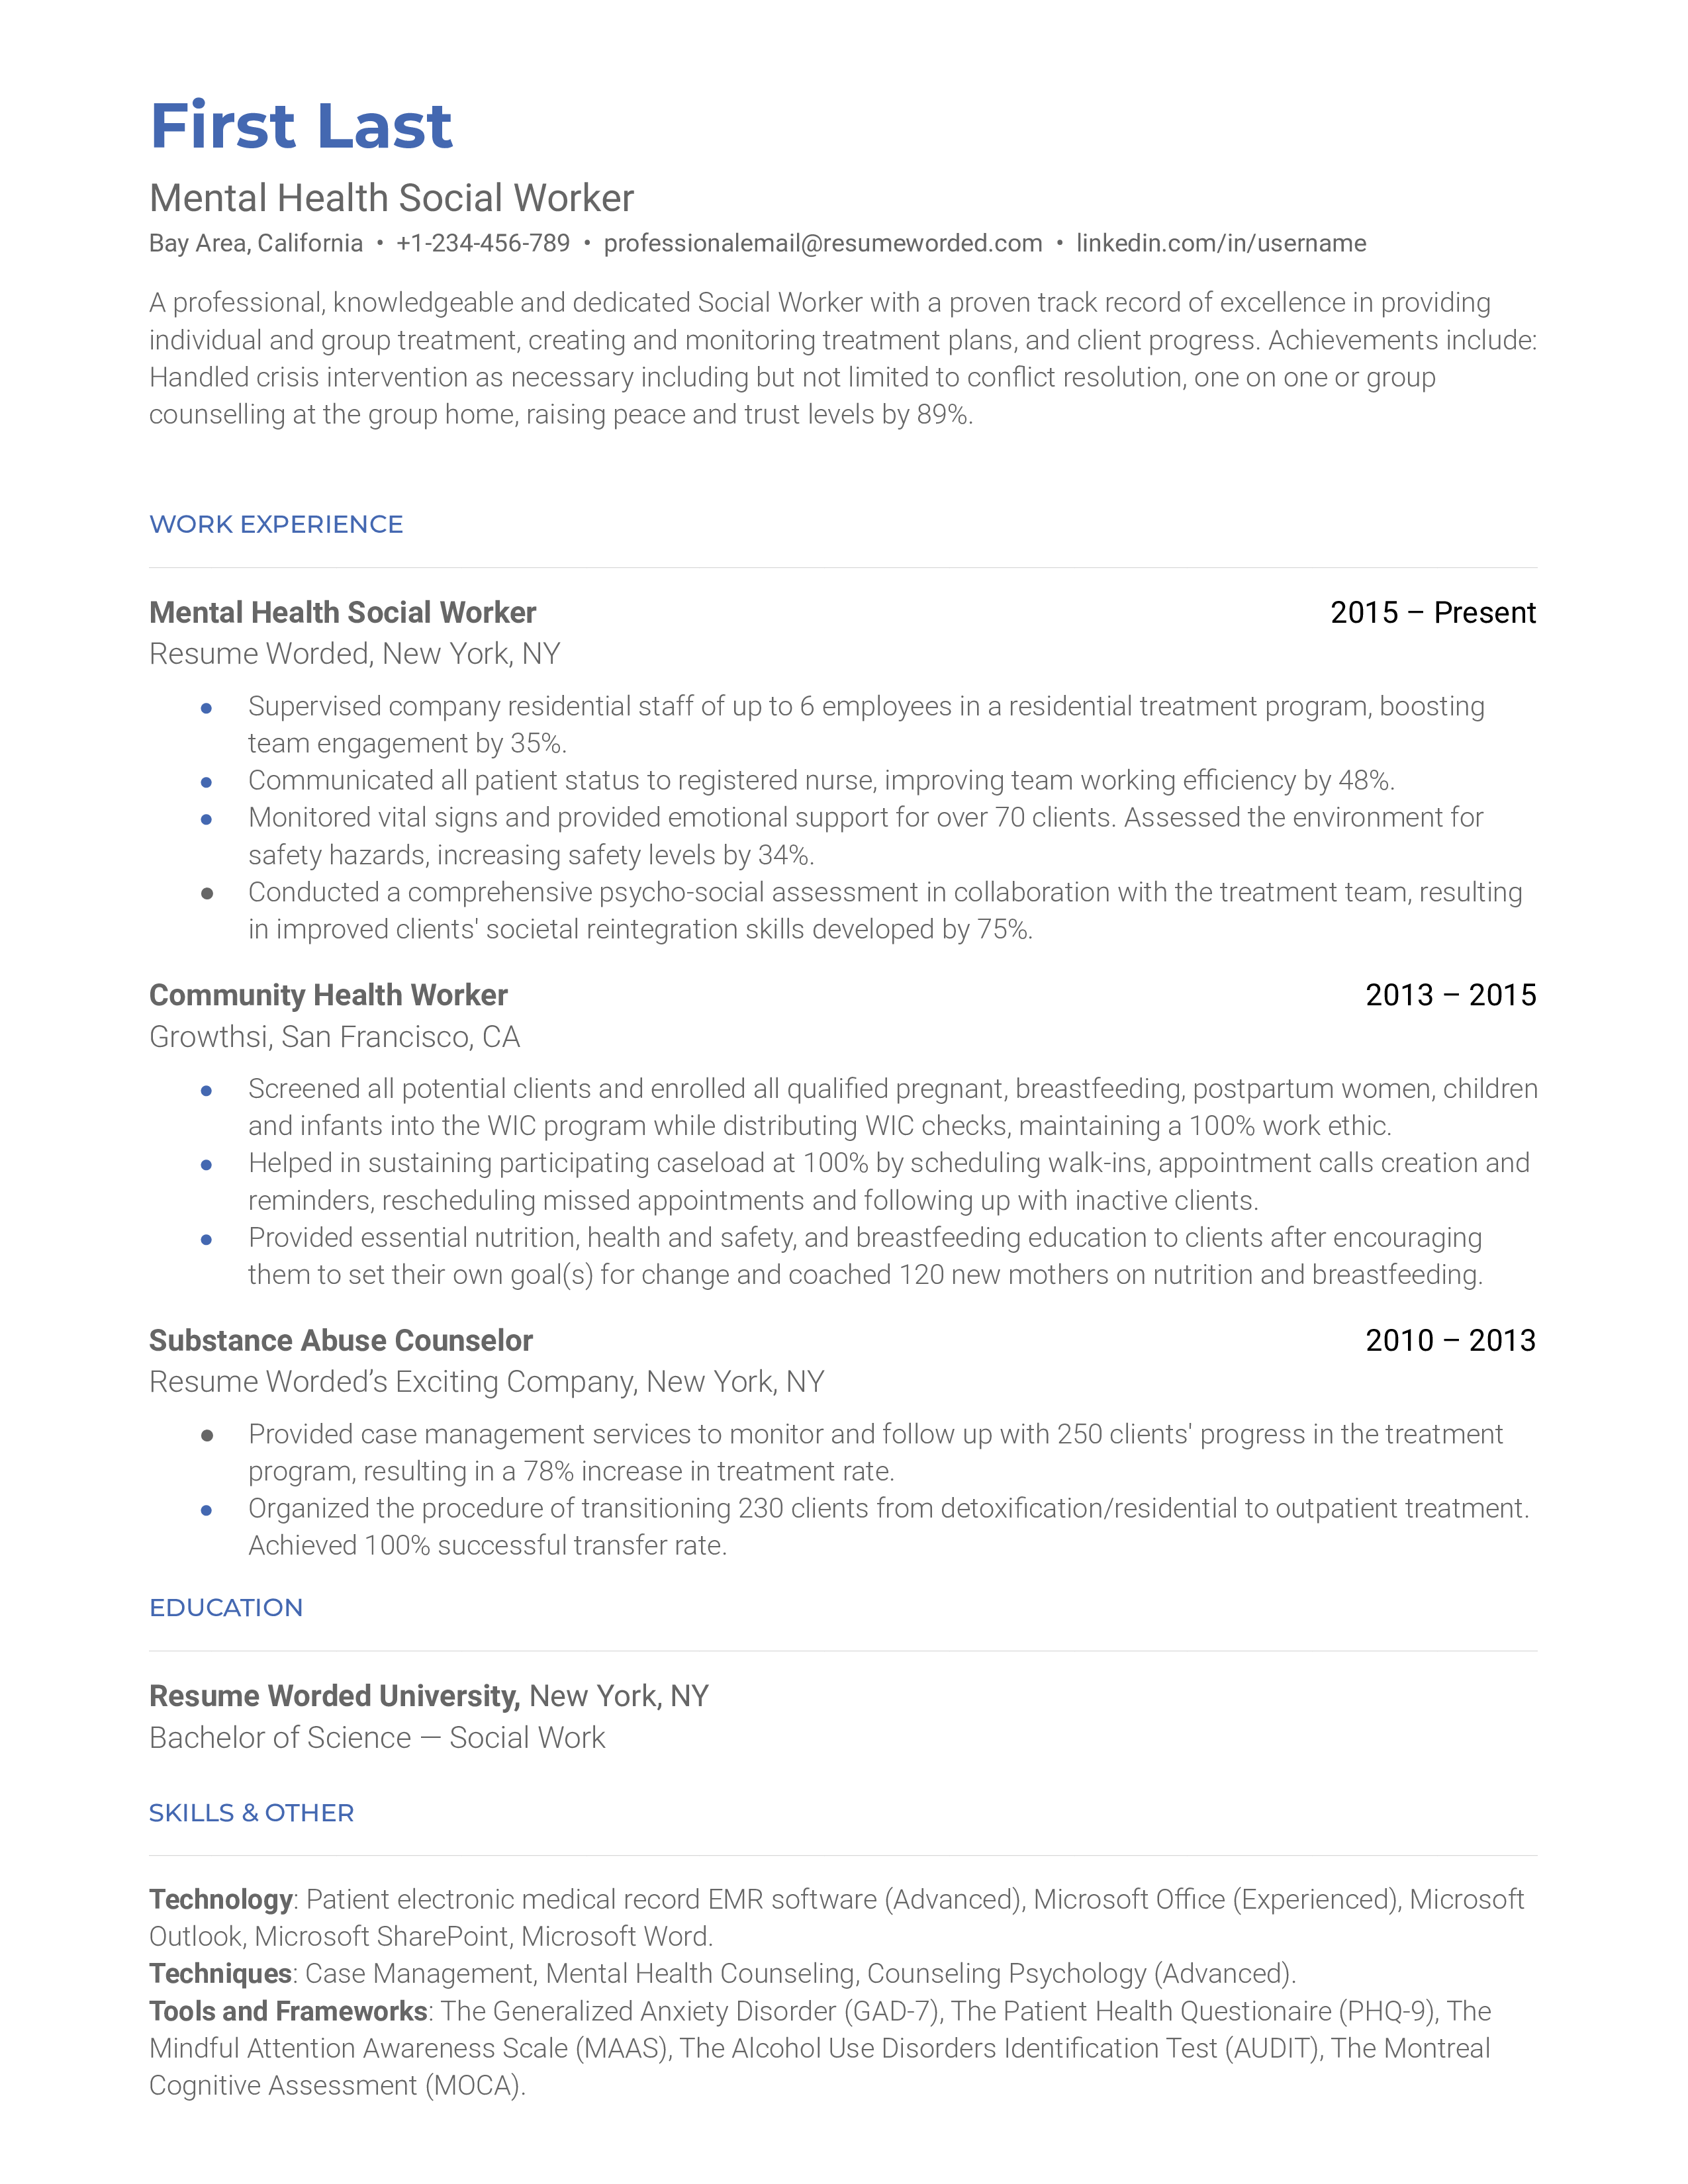 A Mental Health Social Worker CV showcasing skills and practical experience.